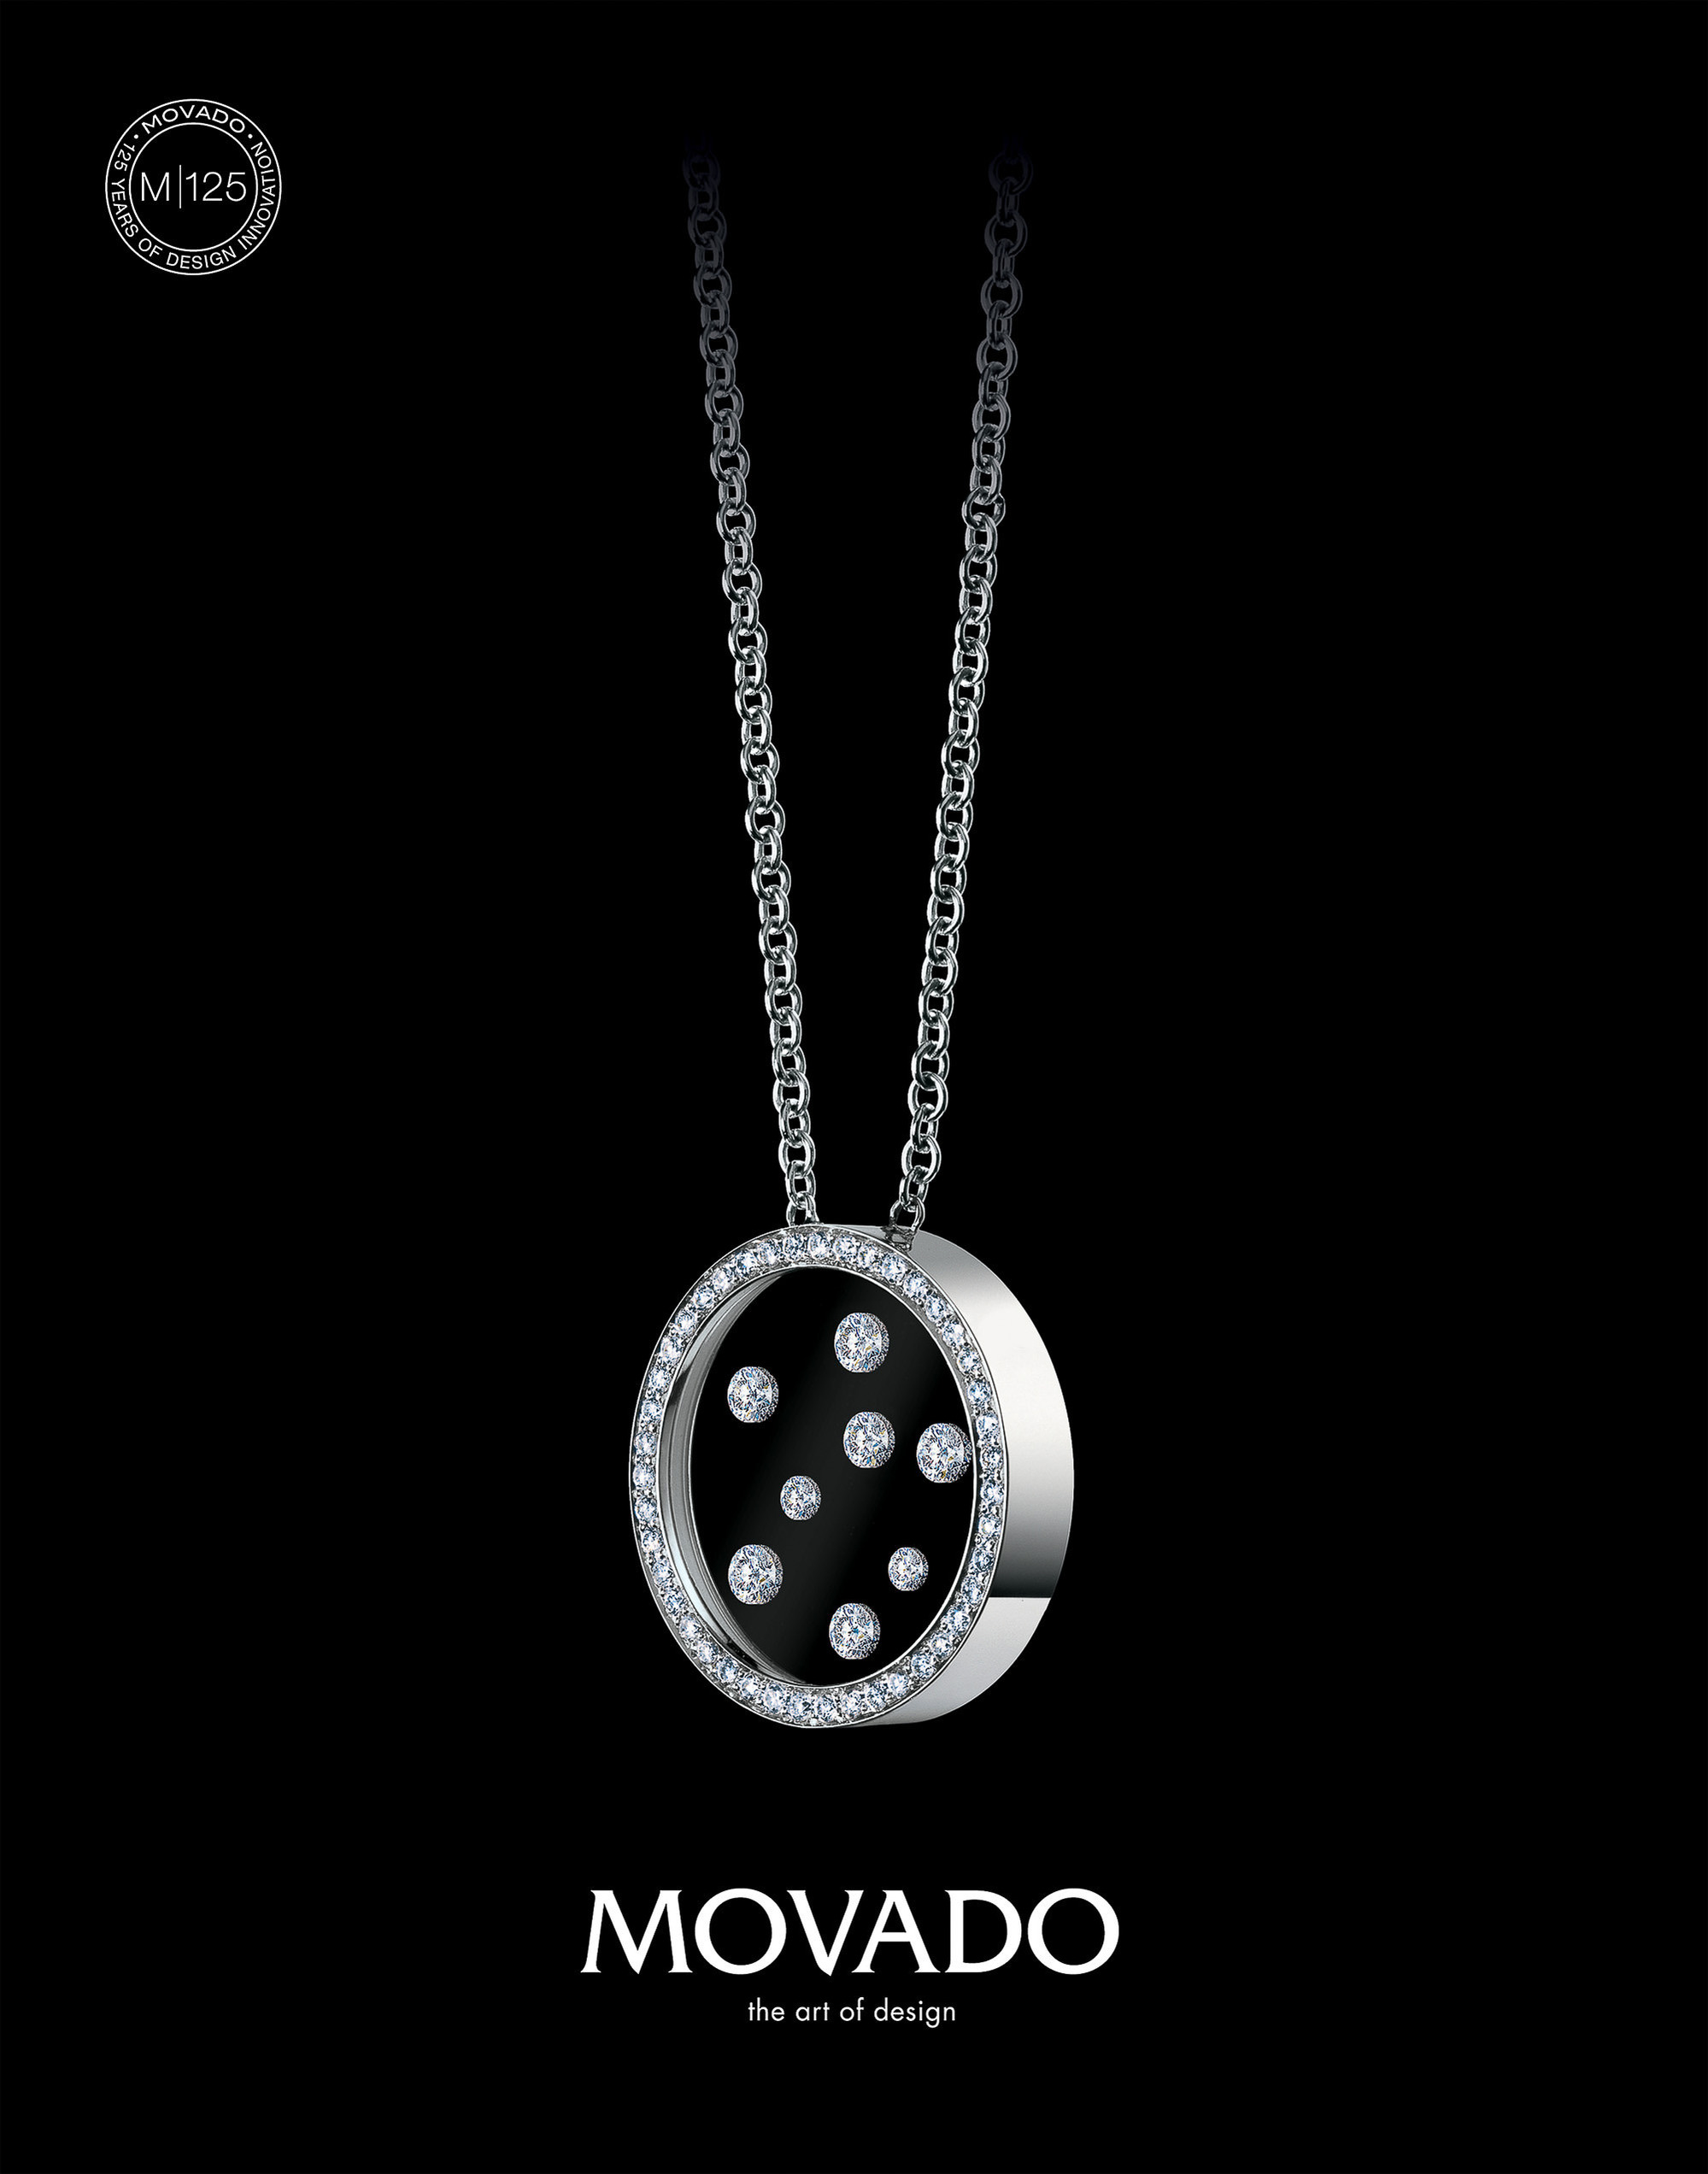 Movado jewelry campaign Photography by commercial, product & advertising photographer Timothy Hogan in studio Los Angeles